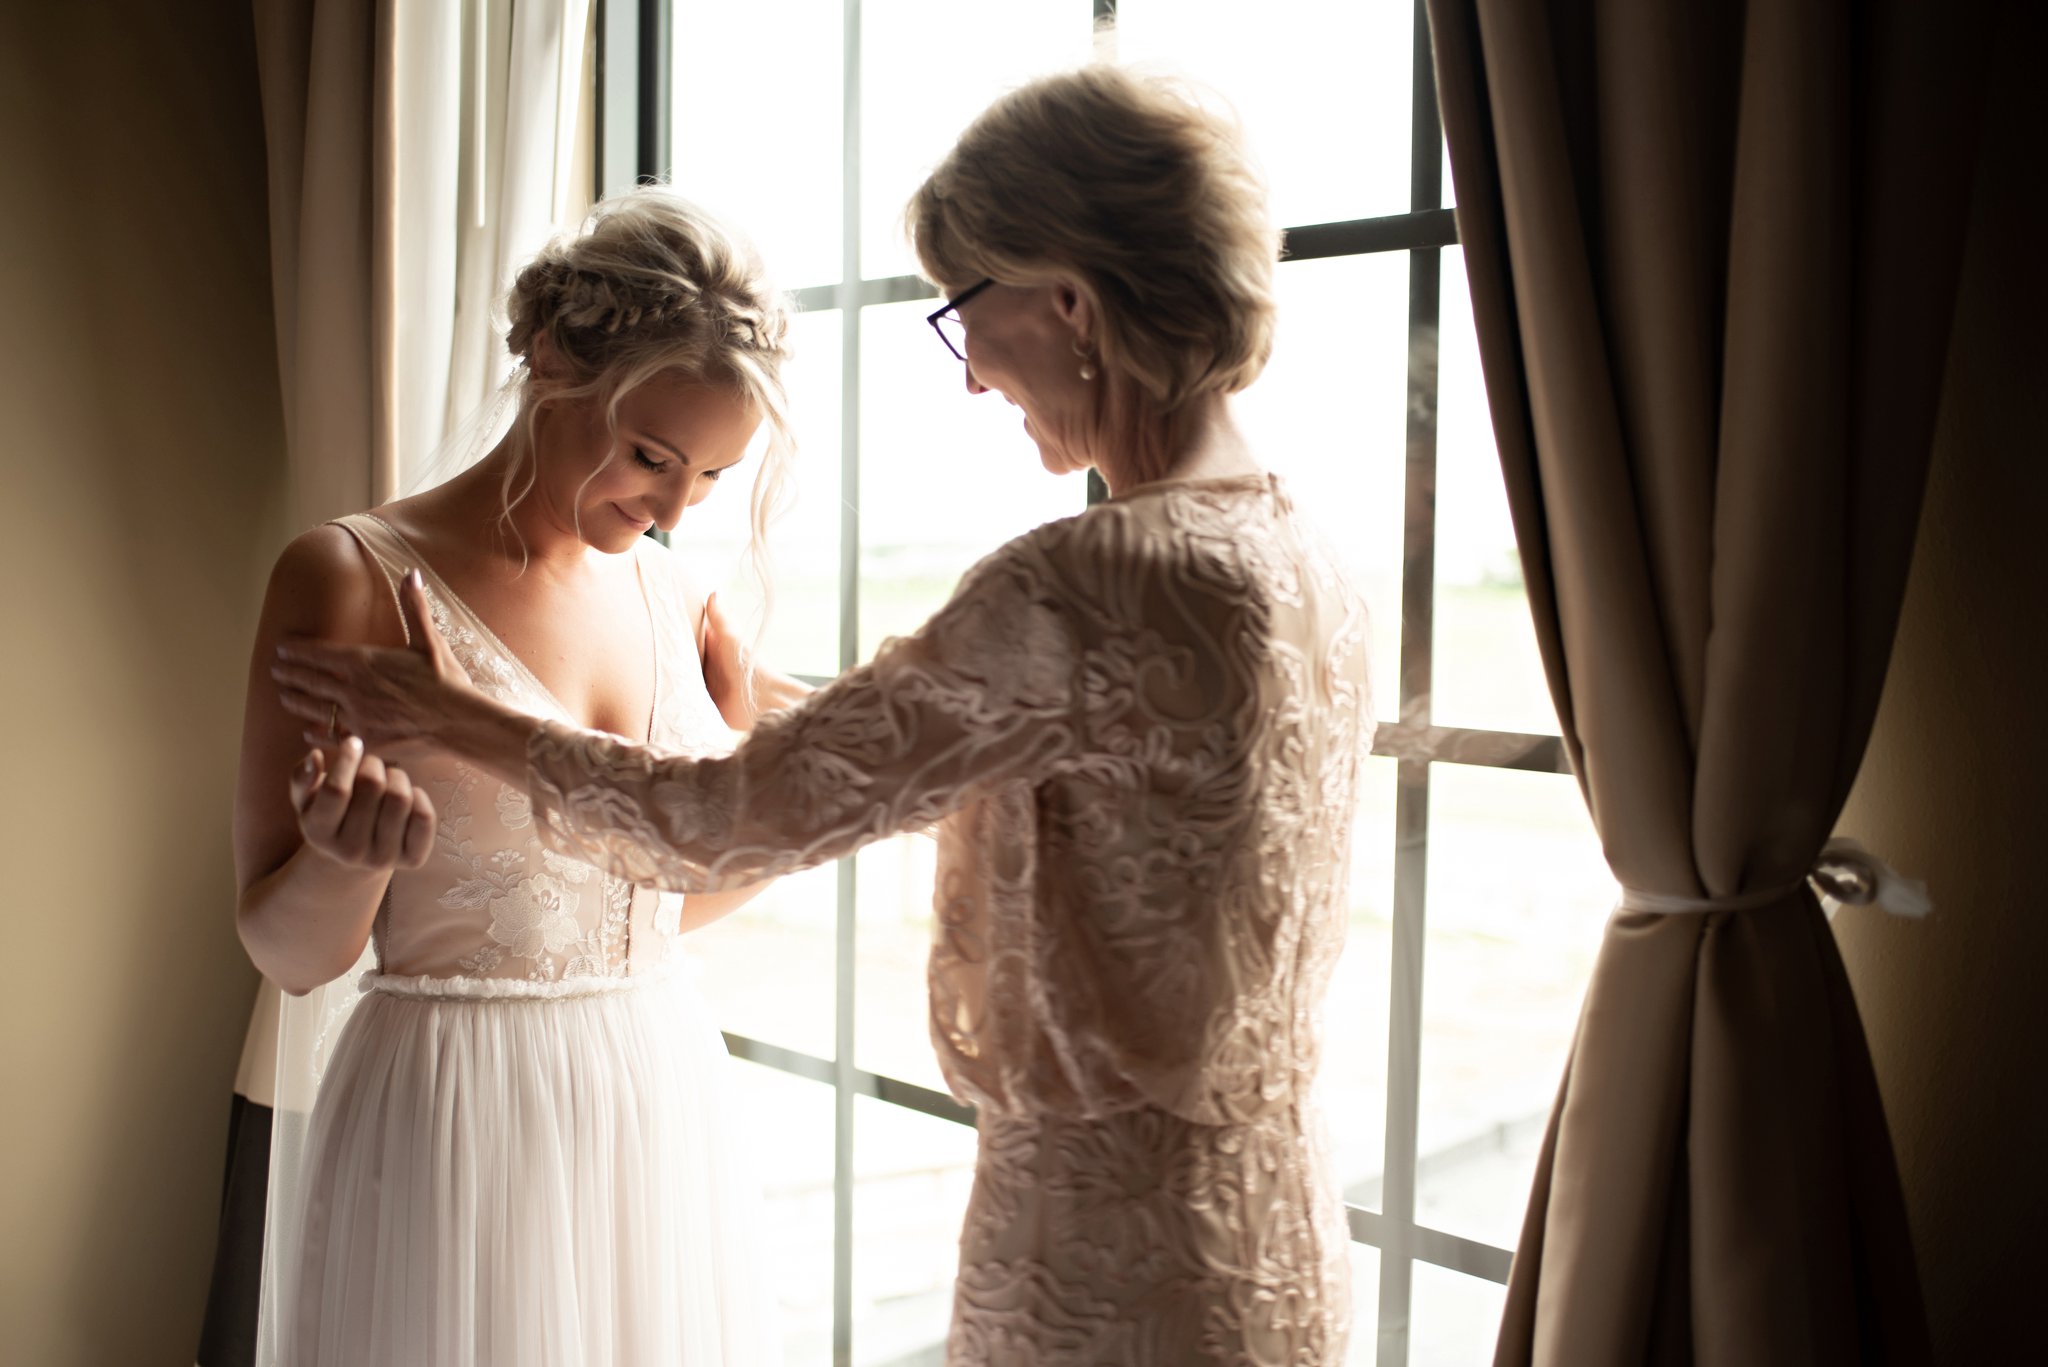 Mom admires the bride in her dress